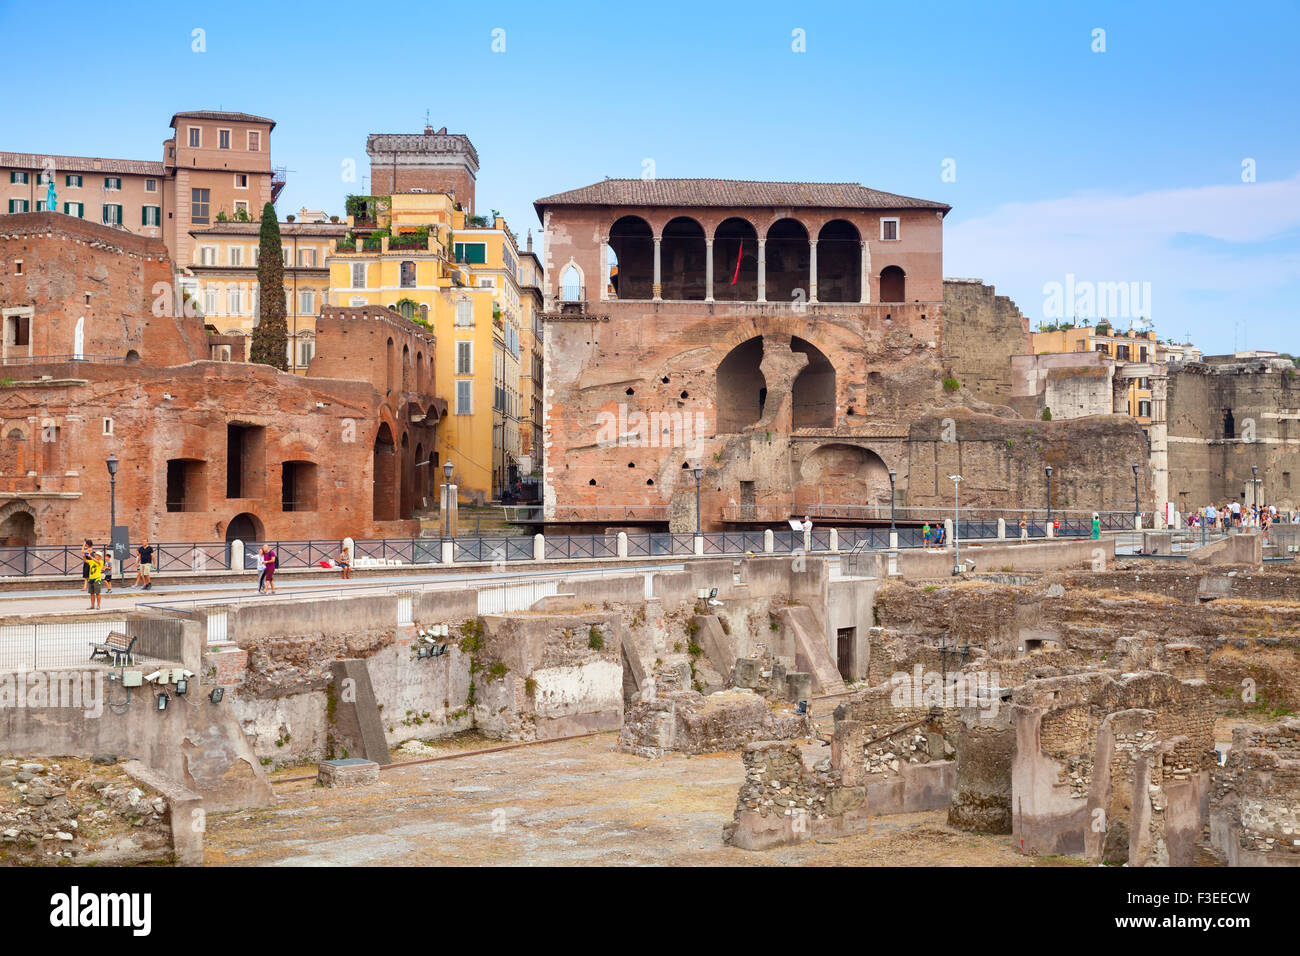 Remains of Imperial forums in Rome.Italy Stock Photo